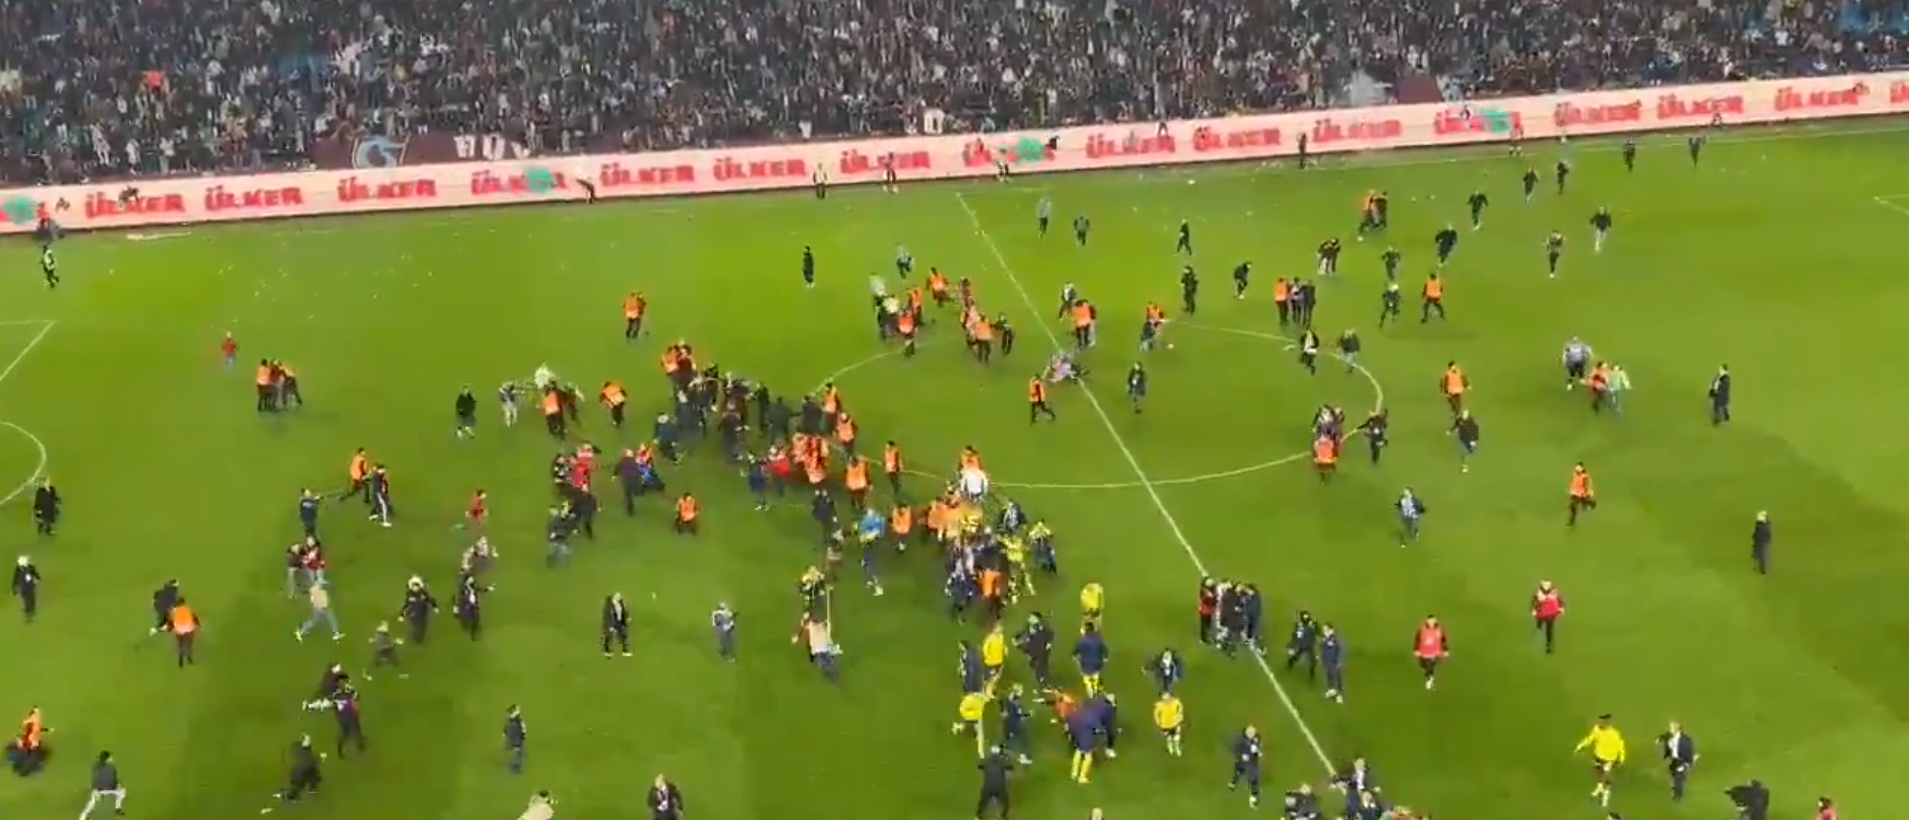   	      Chaos Erupts At Turkish Soccer Game After Fans Storm Field, Fight Players |   	  The Daily Caller  	